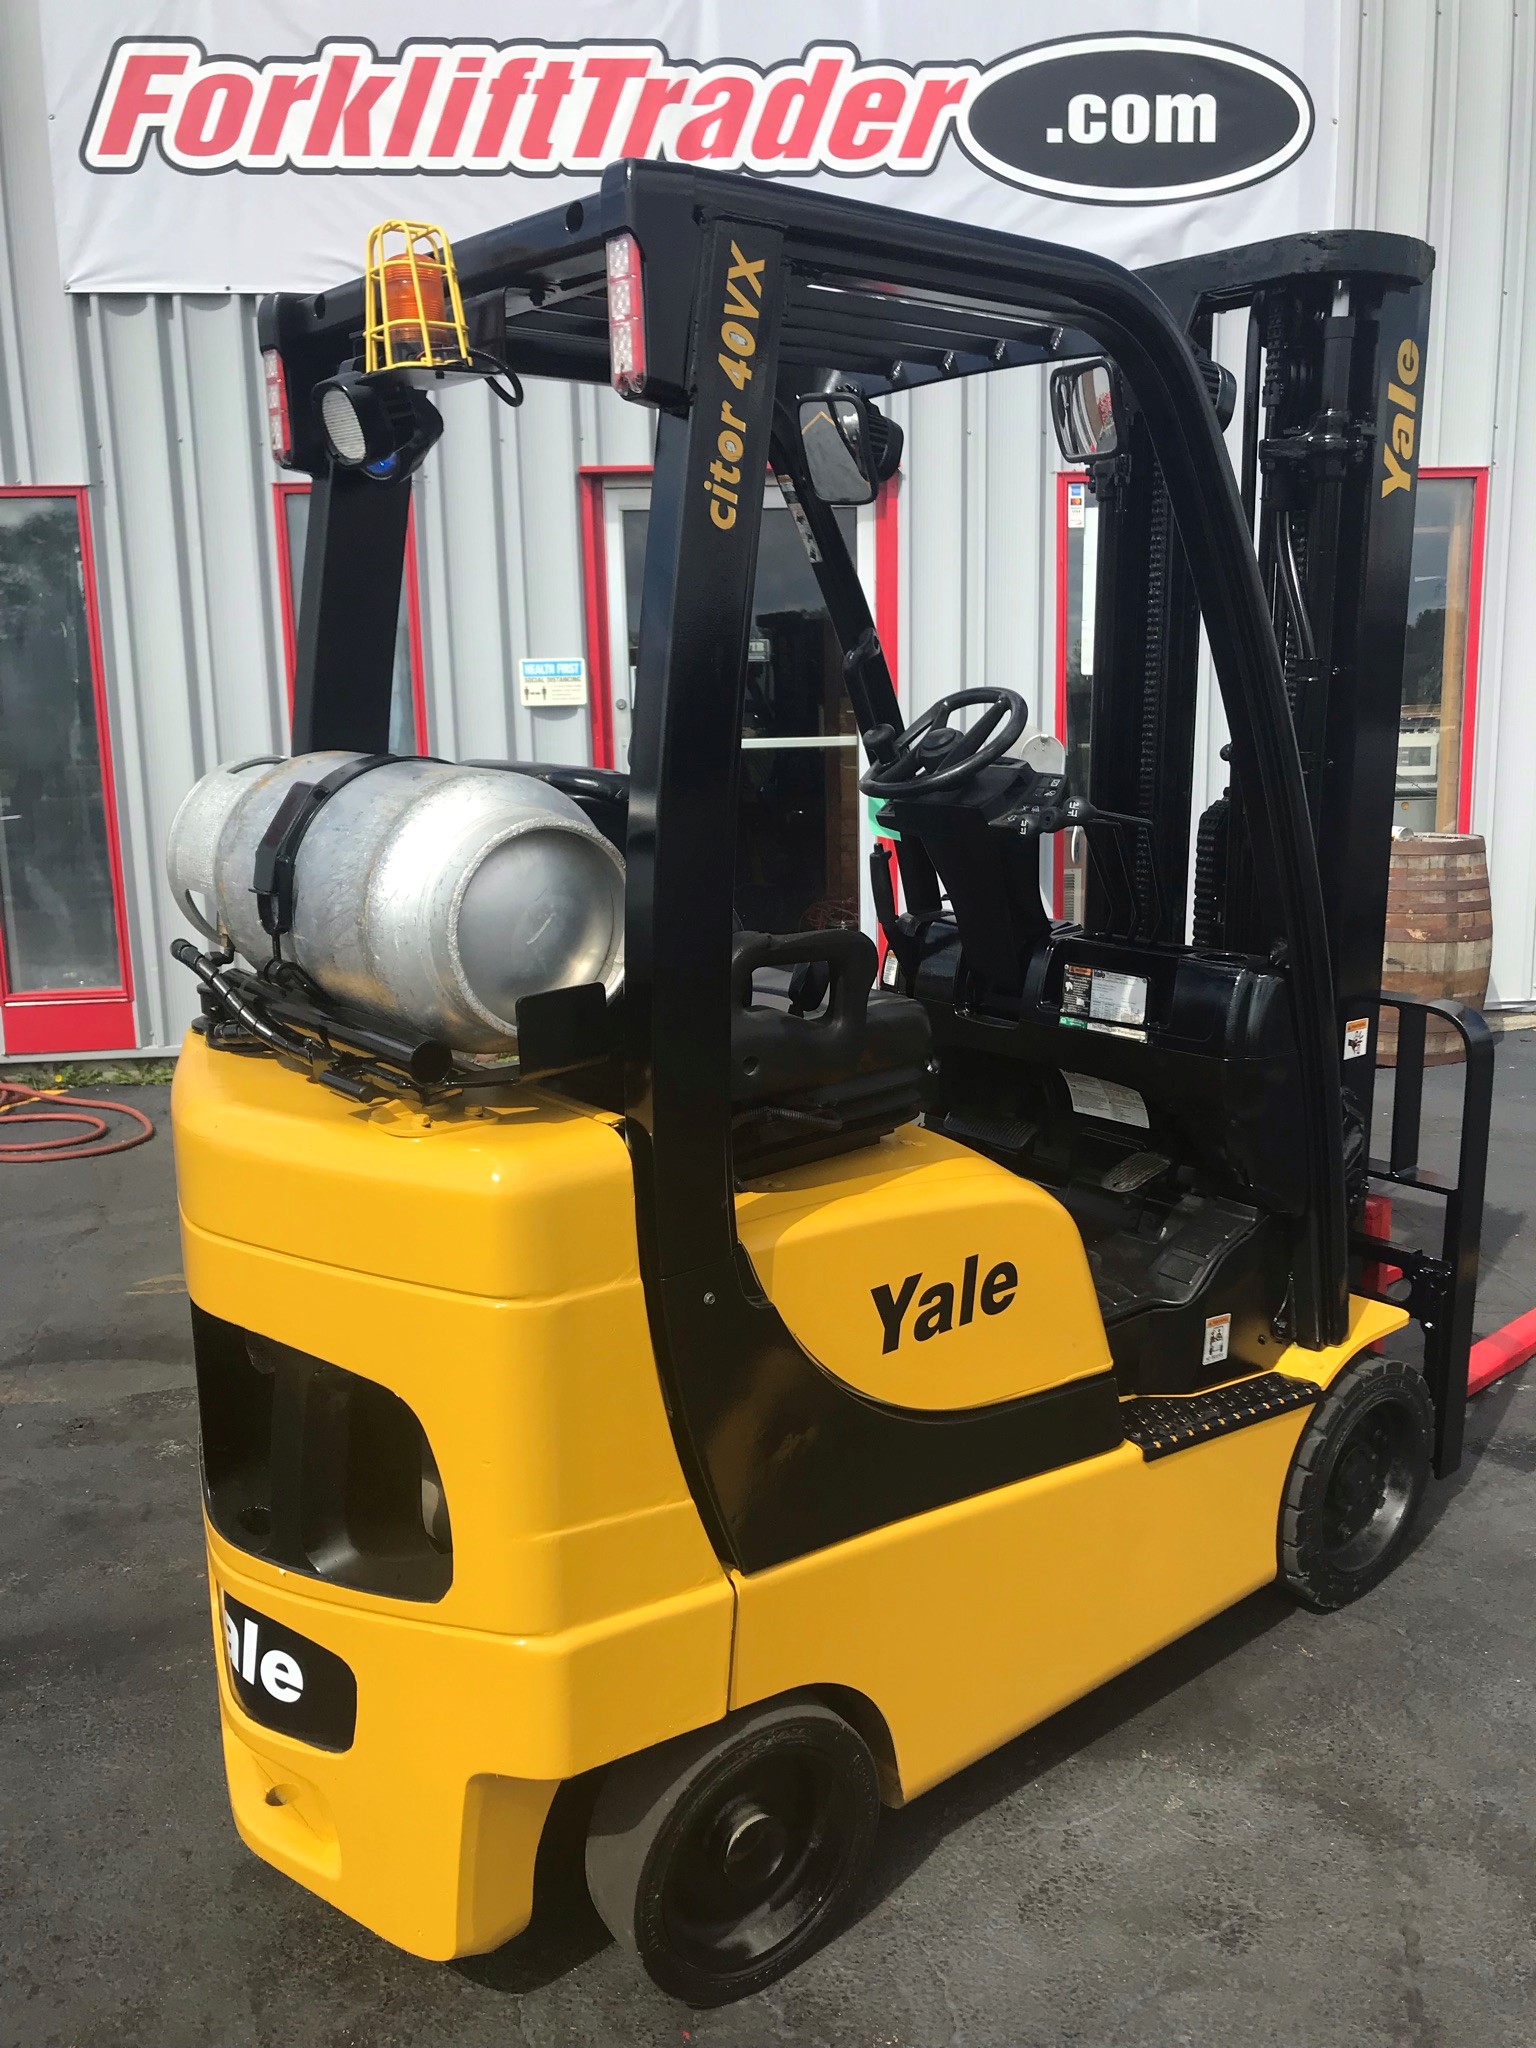 4,000lb capacity 2013 yellow yale forklift for sale